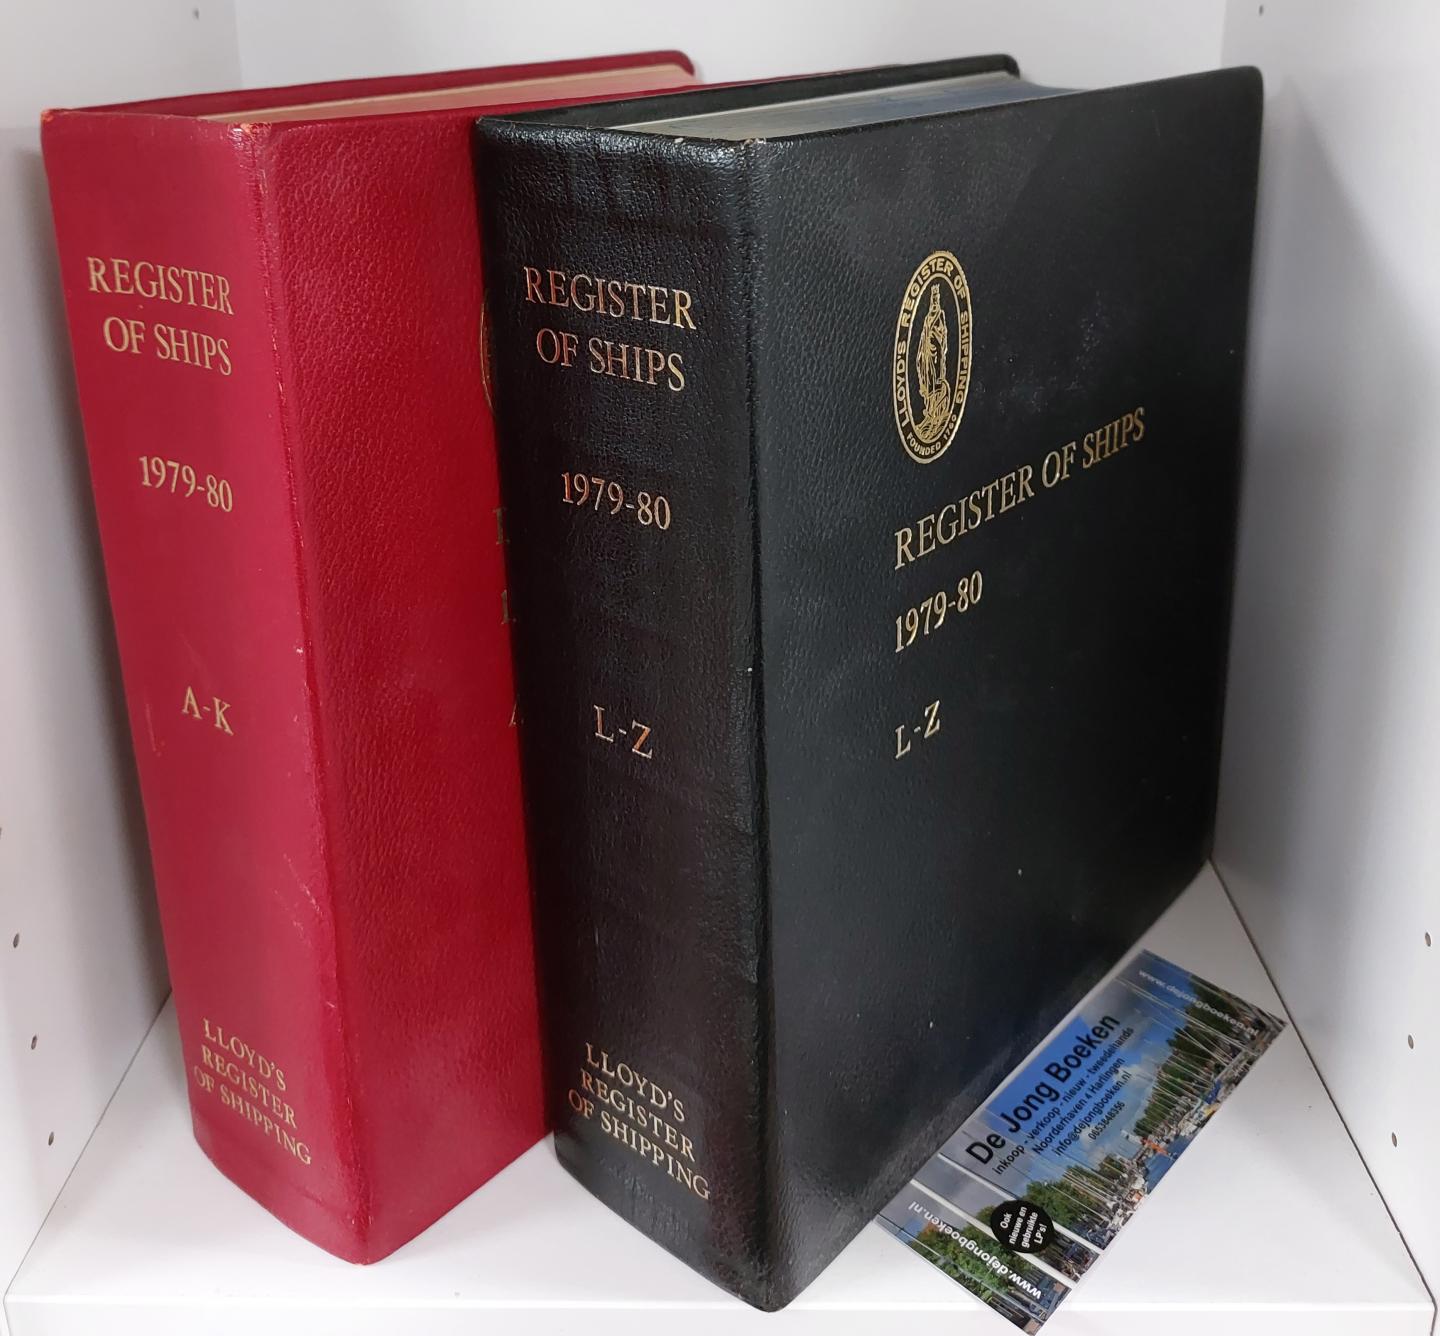  - Lloyd's register of shipping. Register of ships 1979-80. Two volumes (A-K & L-Z).